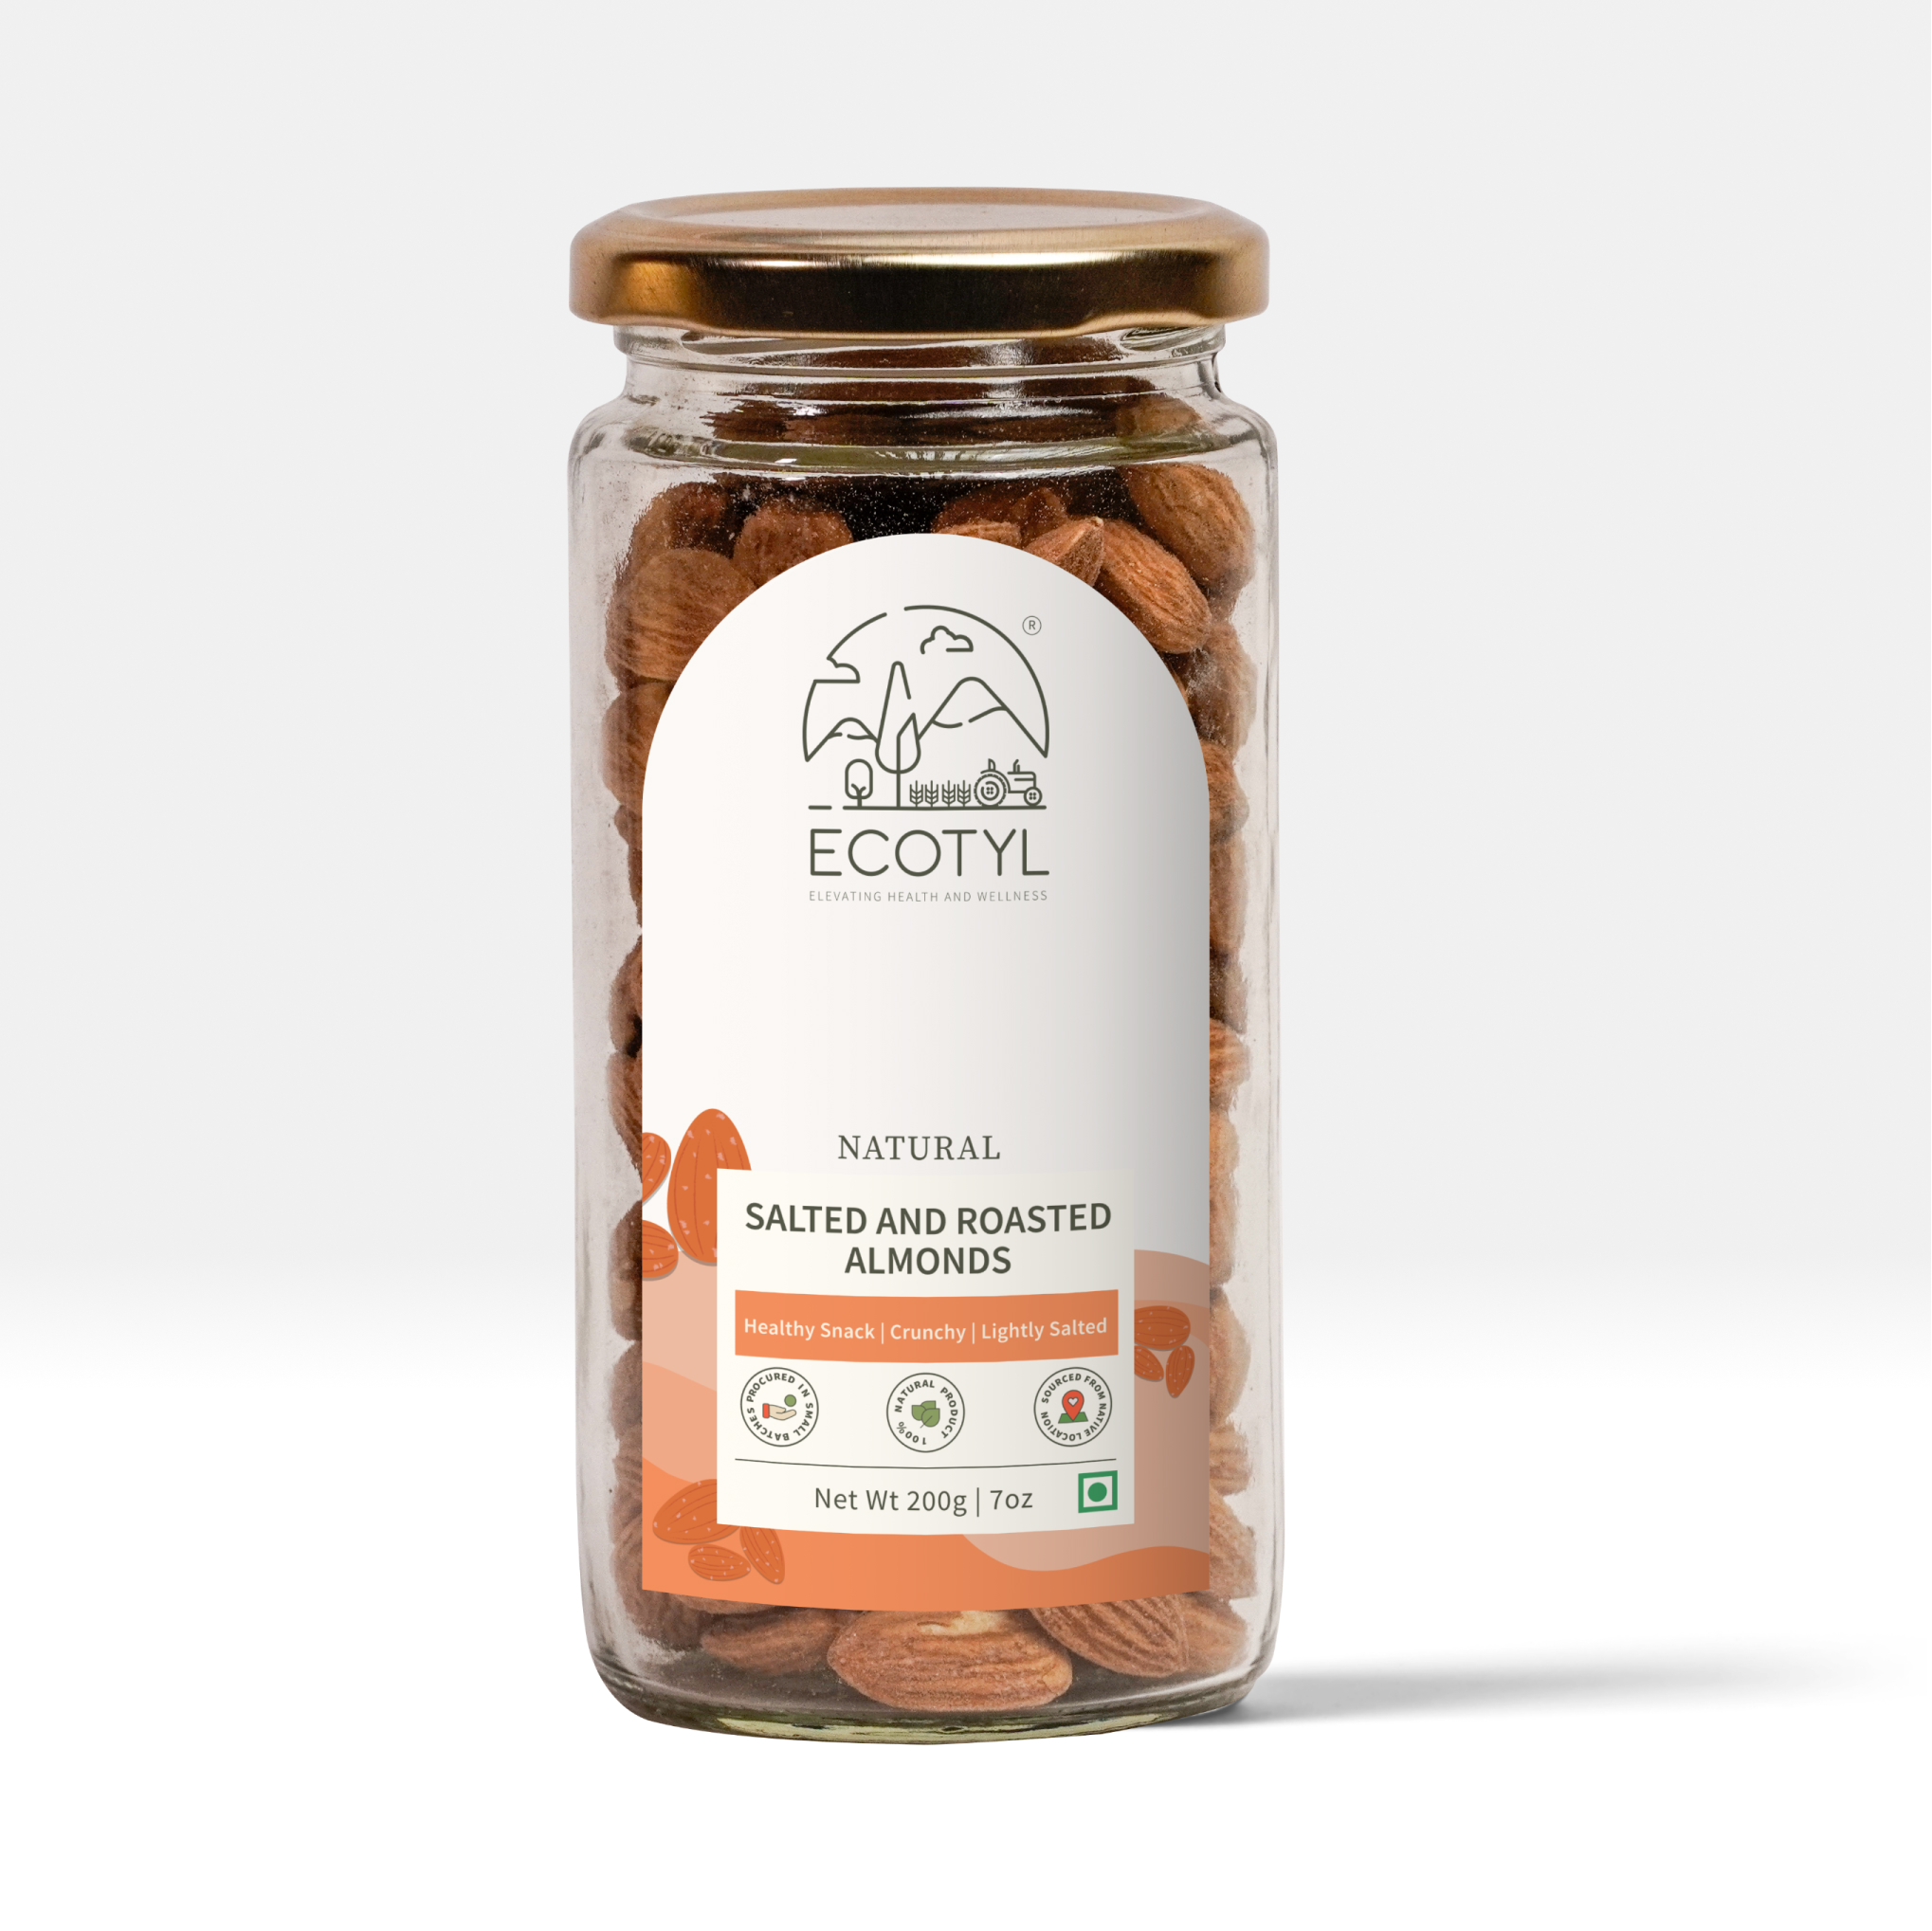 Buy Ecotyl Natural Roasted and Salted Almonds - 200g at Best Price Online